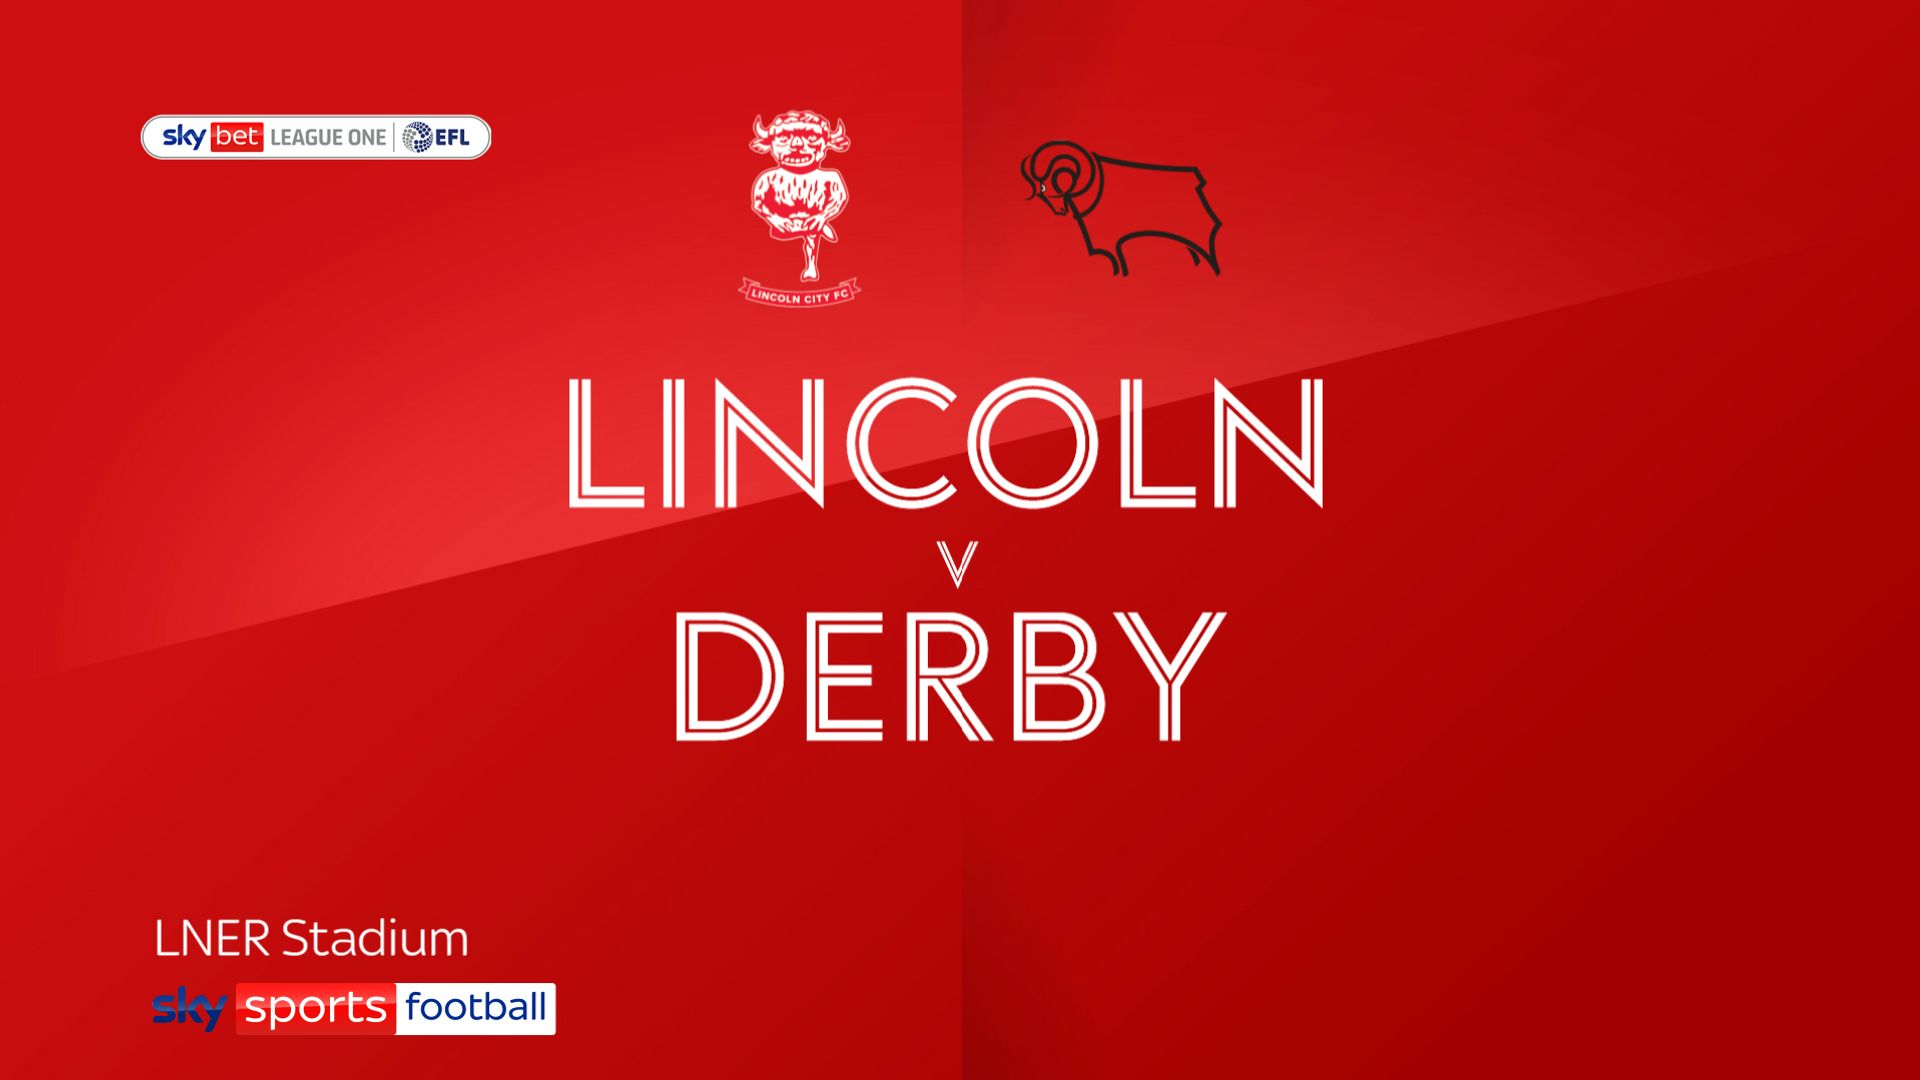 Lincoln beat Derby in first meeting for 36 years